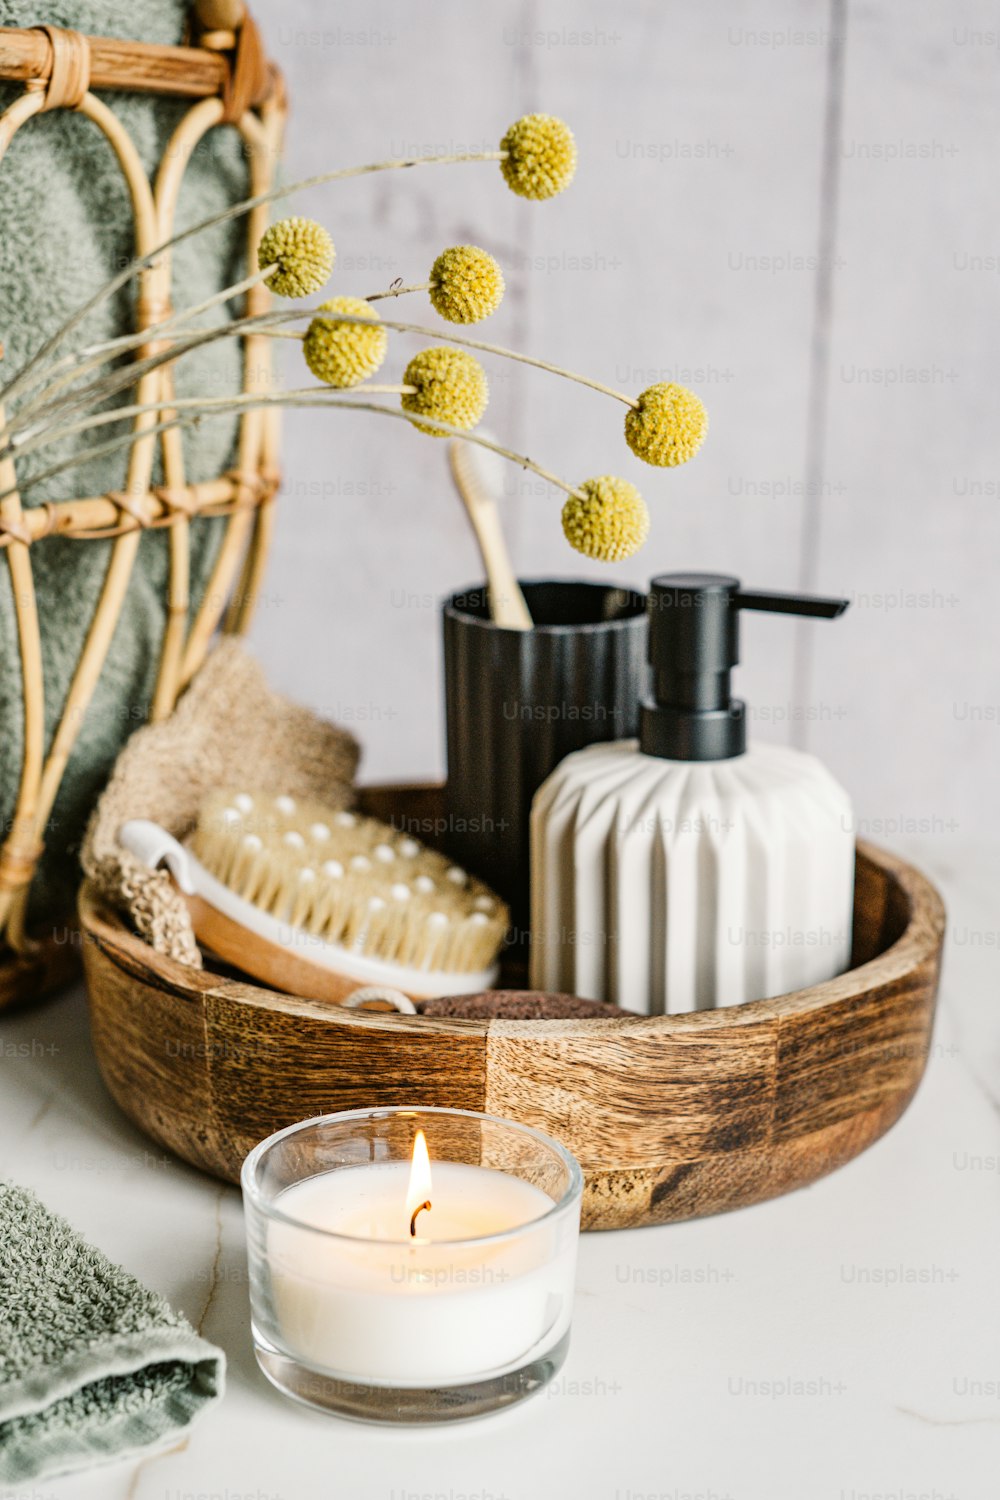 a basket with a candle, soap, brush and soap dispenser